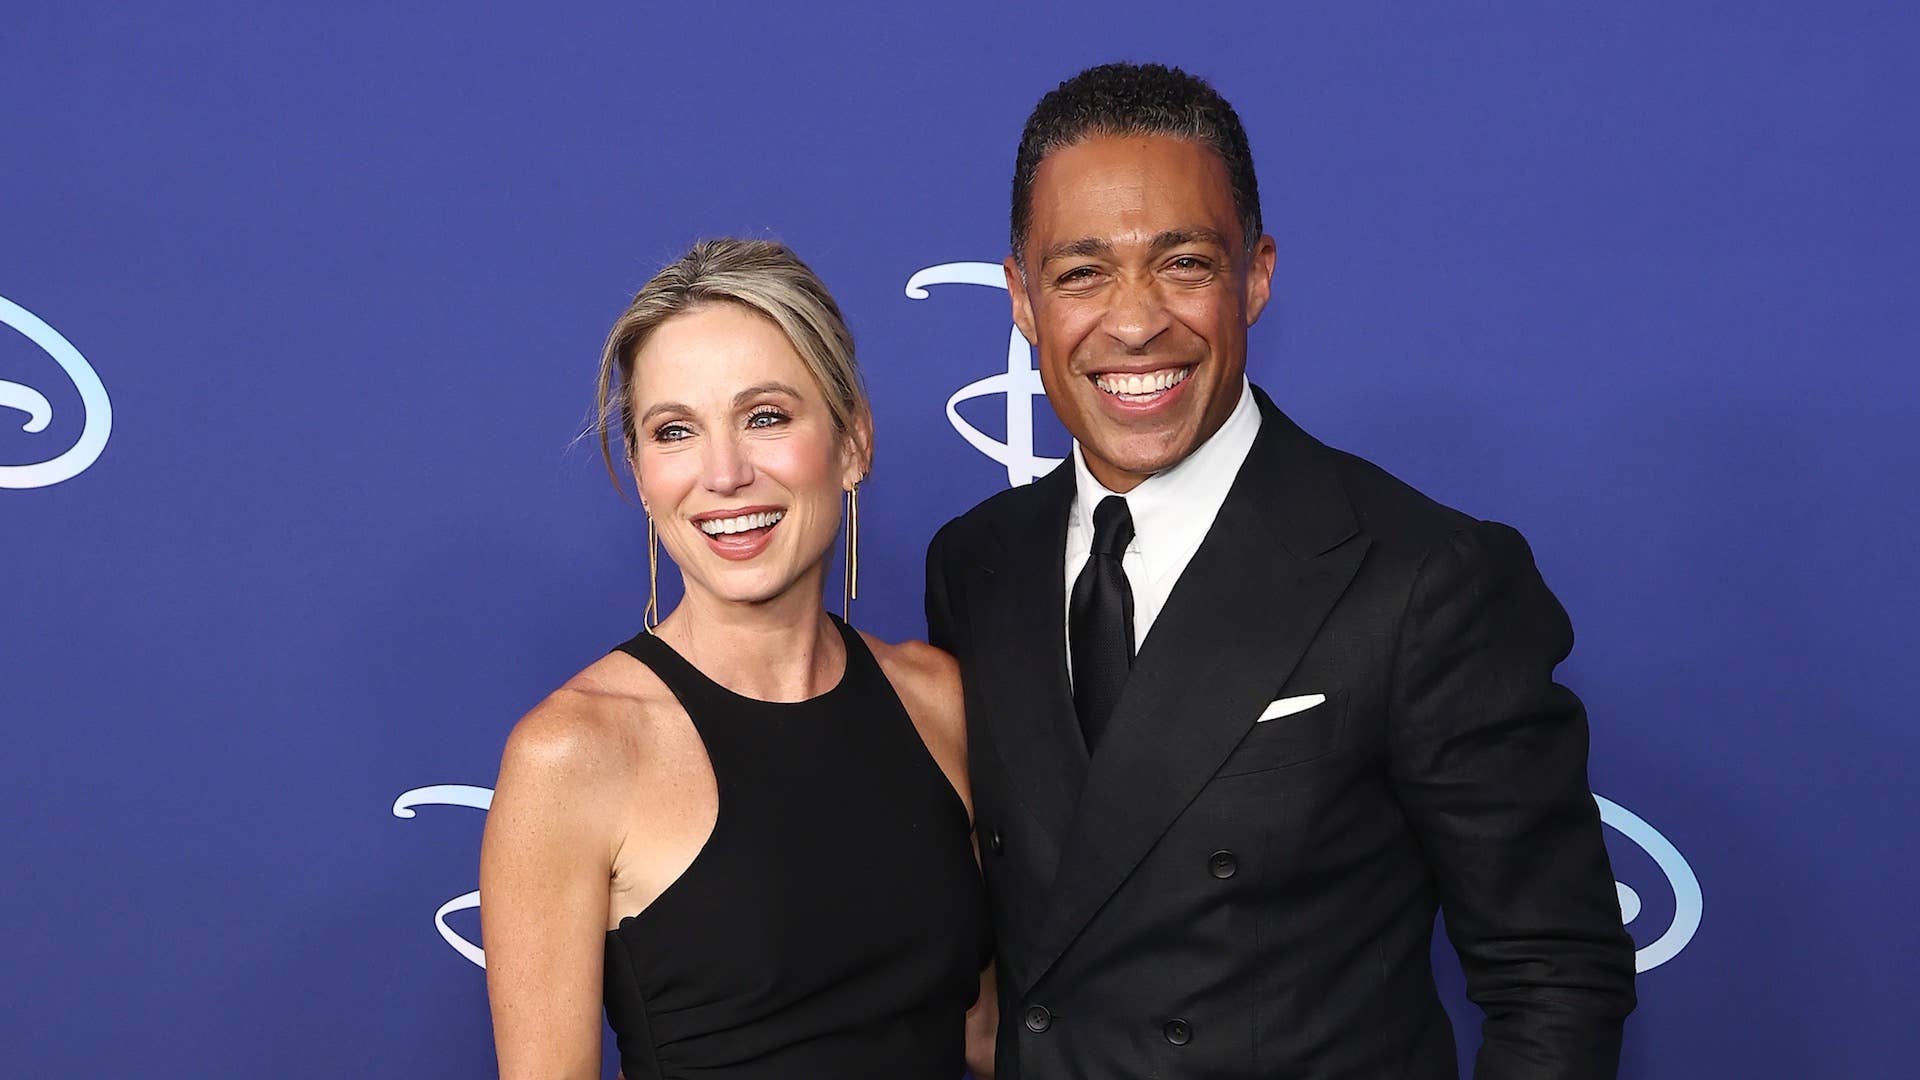 Amy Robach amd TJ Holmes attend the 2022 ABC Disney Upfront at Basketball City